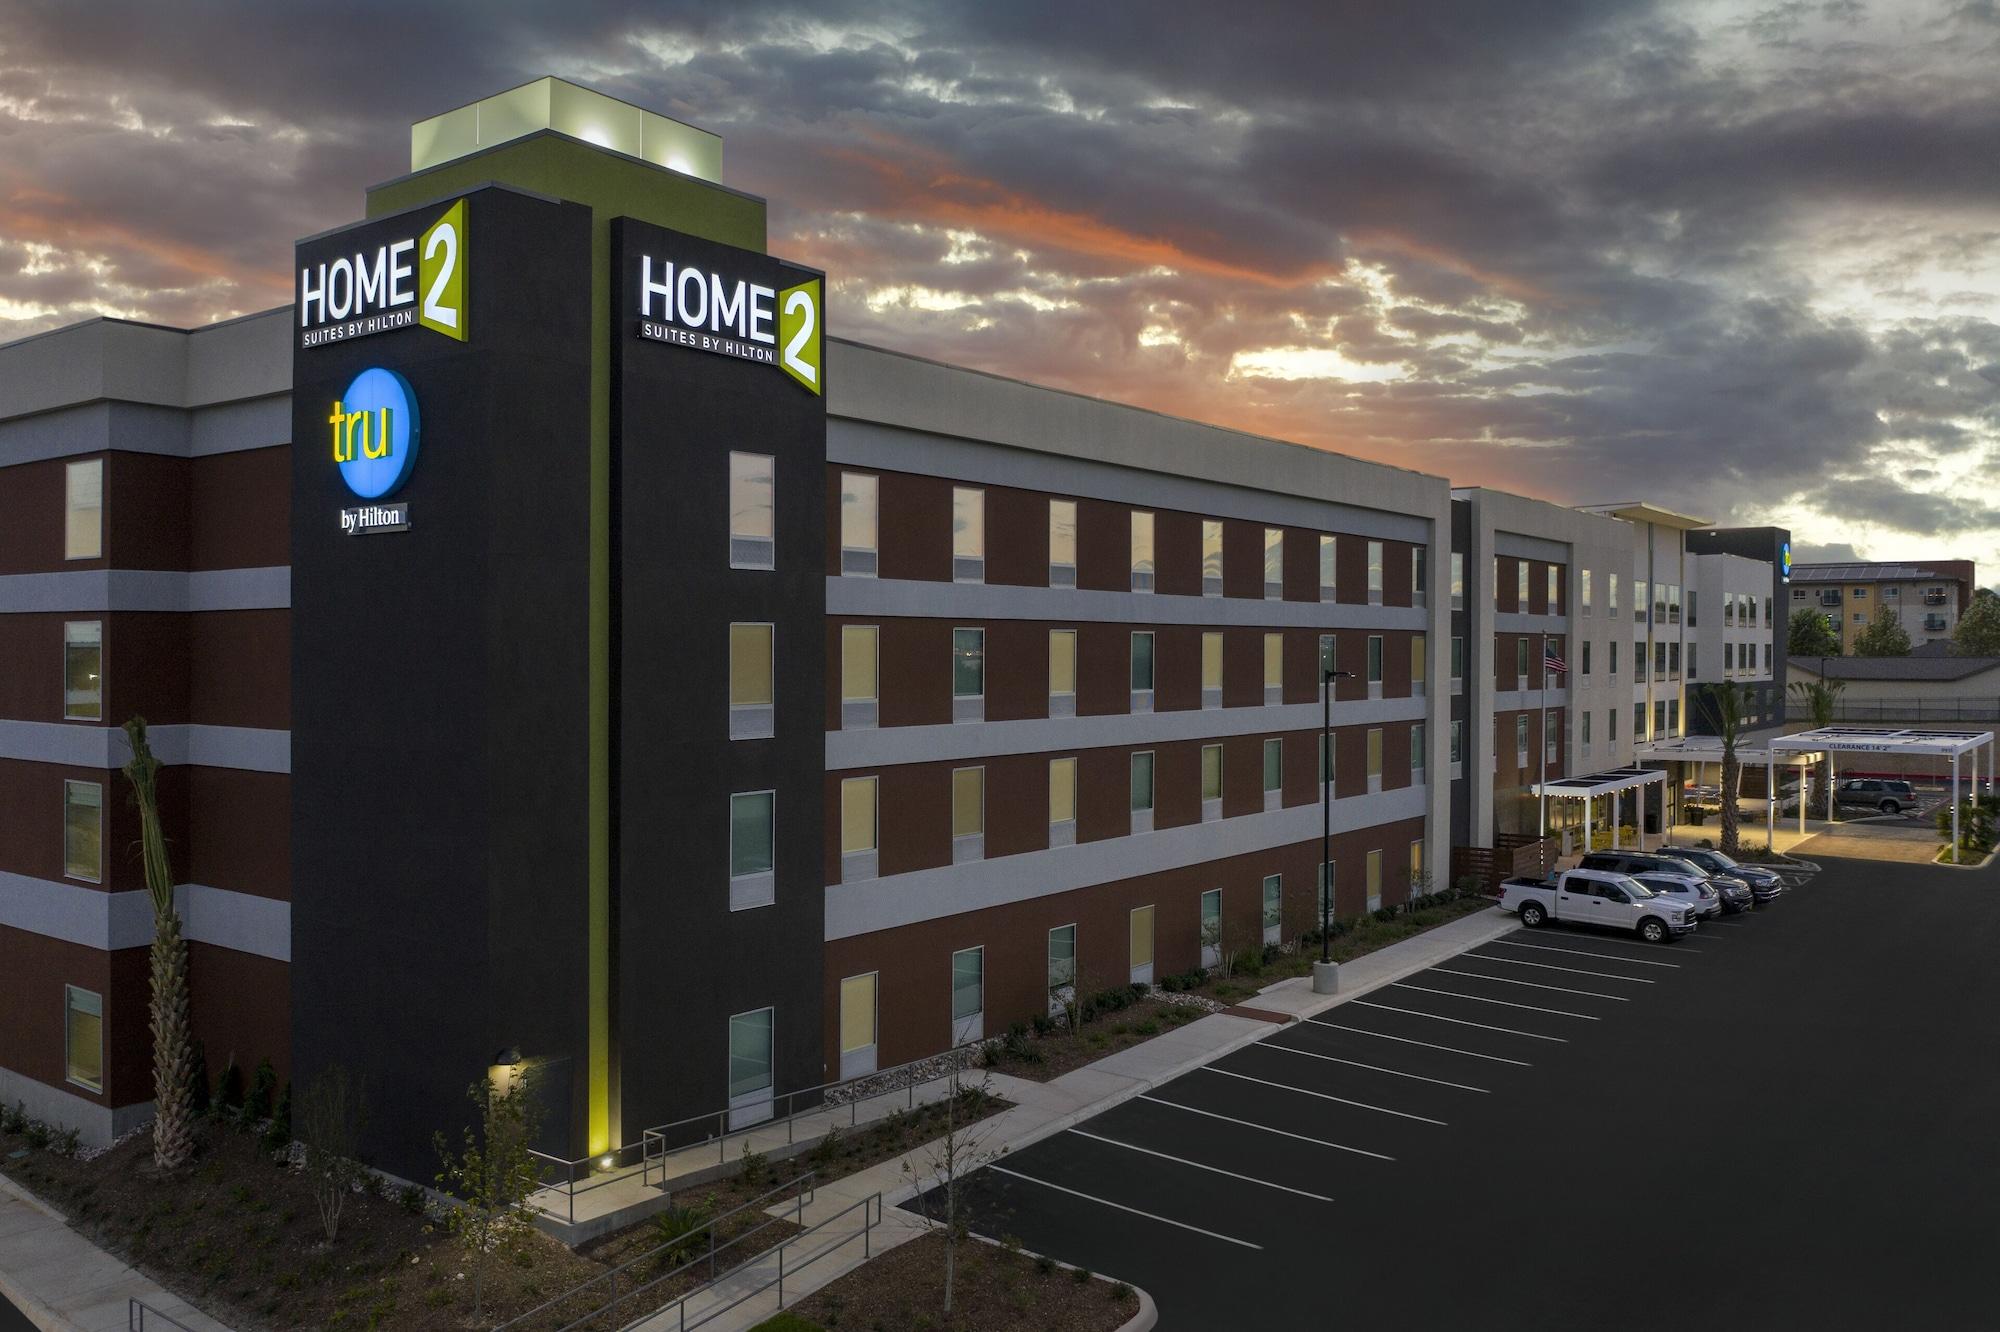 Home2 Suites by Hilton Minneapolis Mall of America image